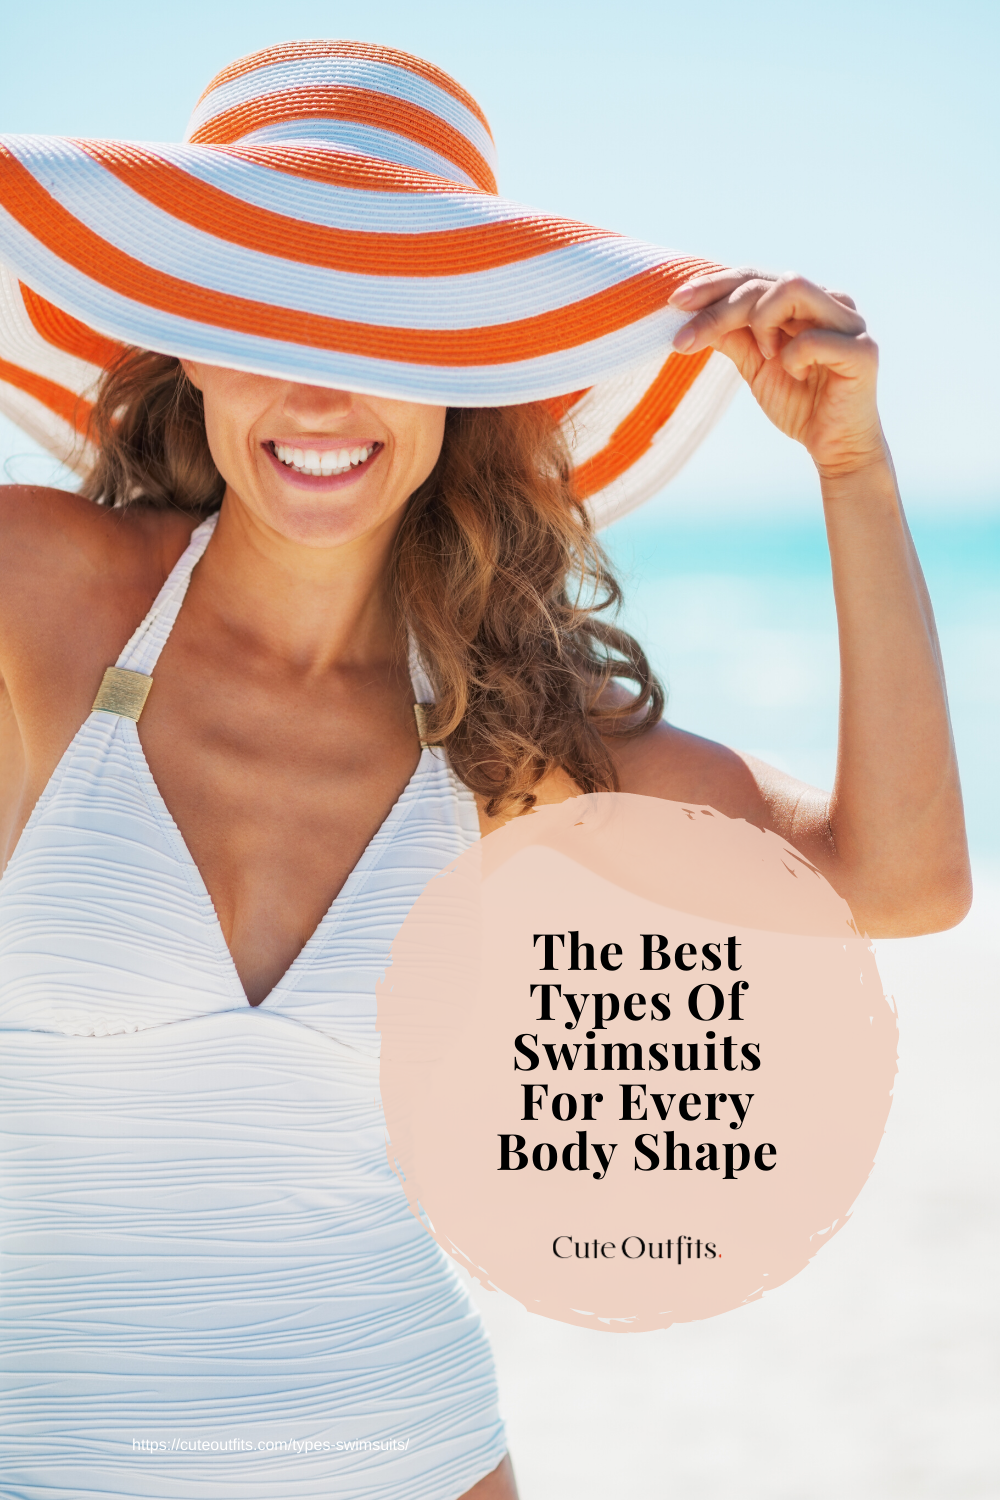 placard | The Best Types Of Swimsuits For Every Body Shape